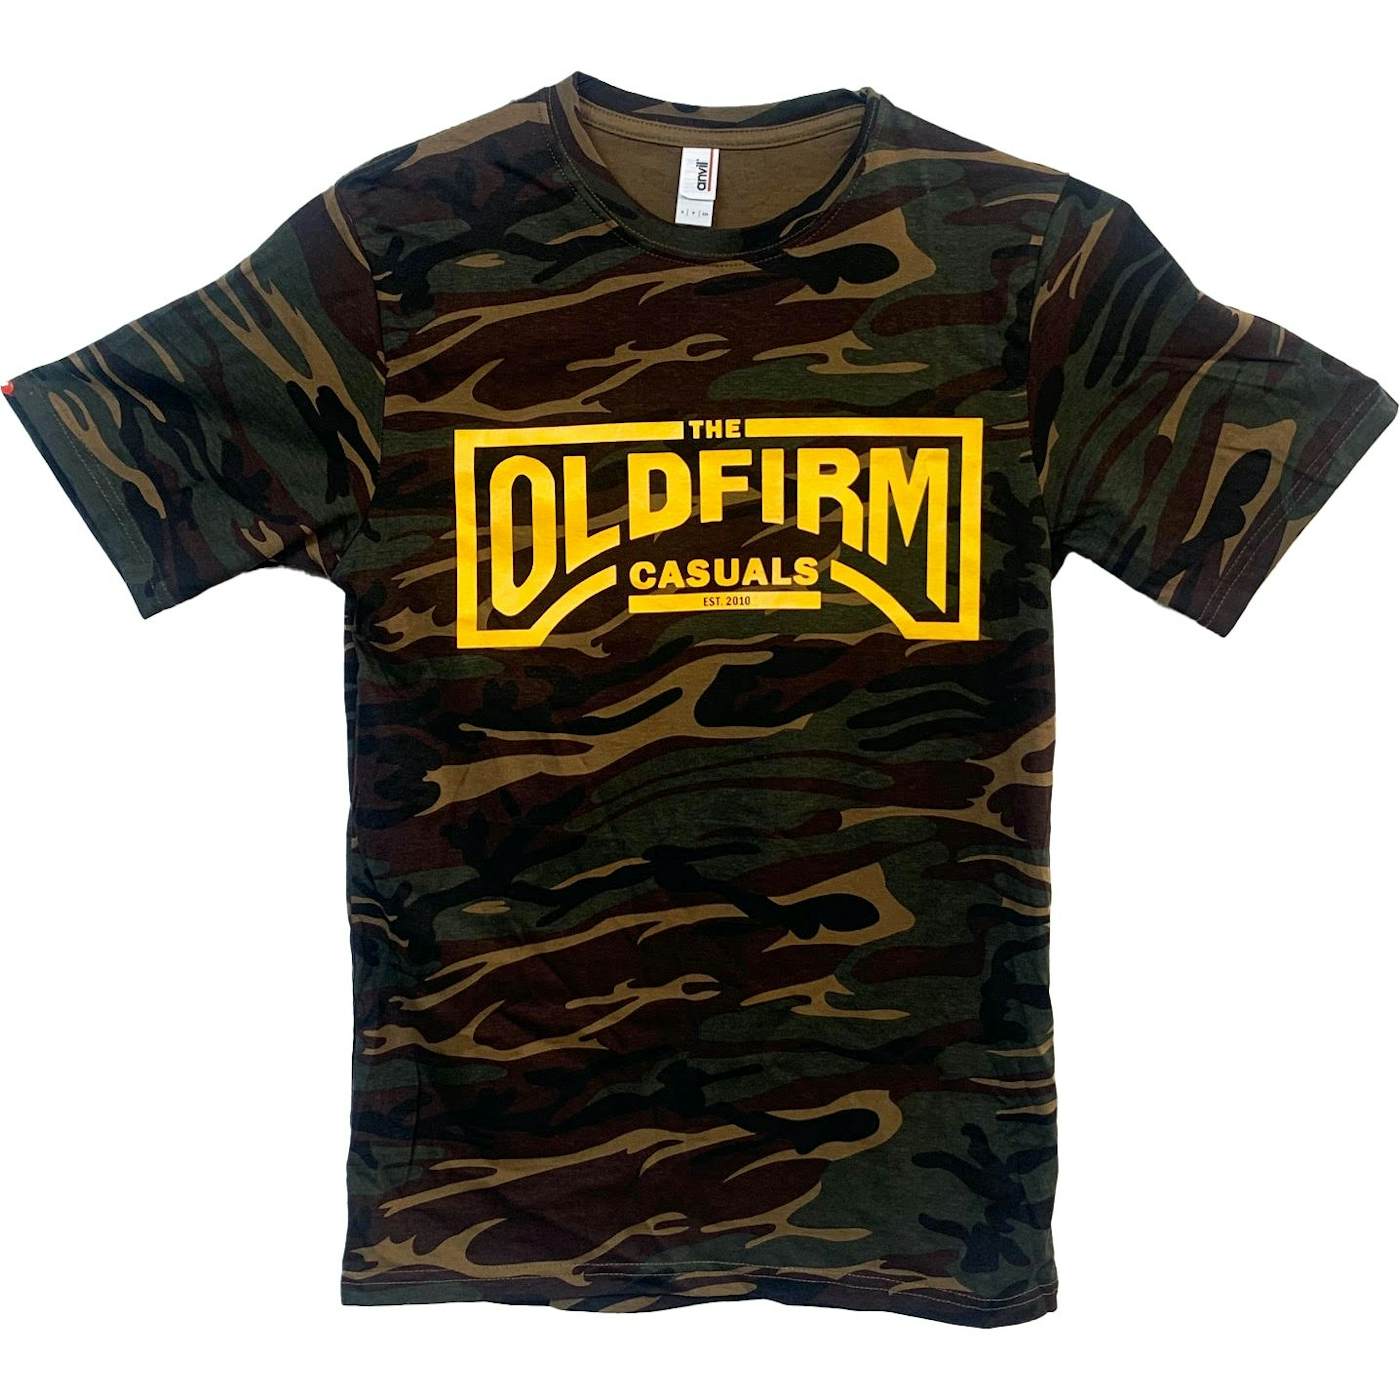 The Old Firm Casuals - Logo - Camo - T-Shirt